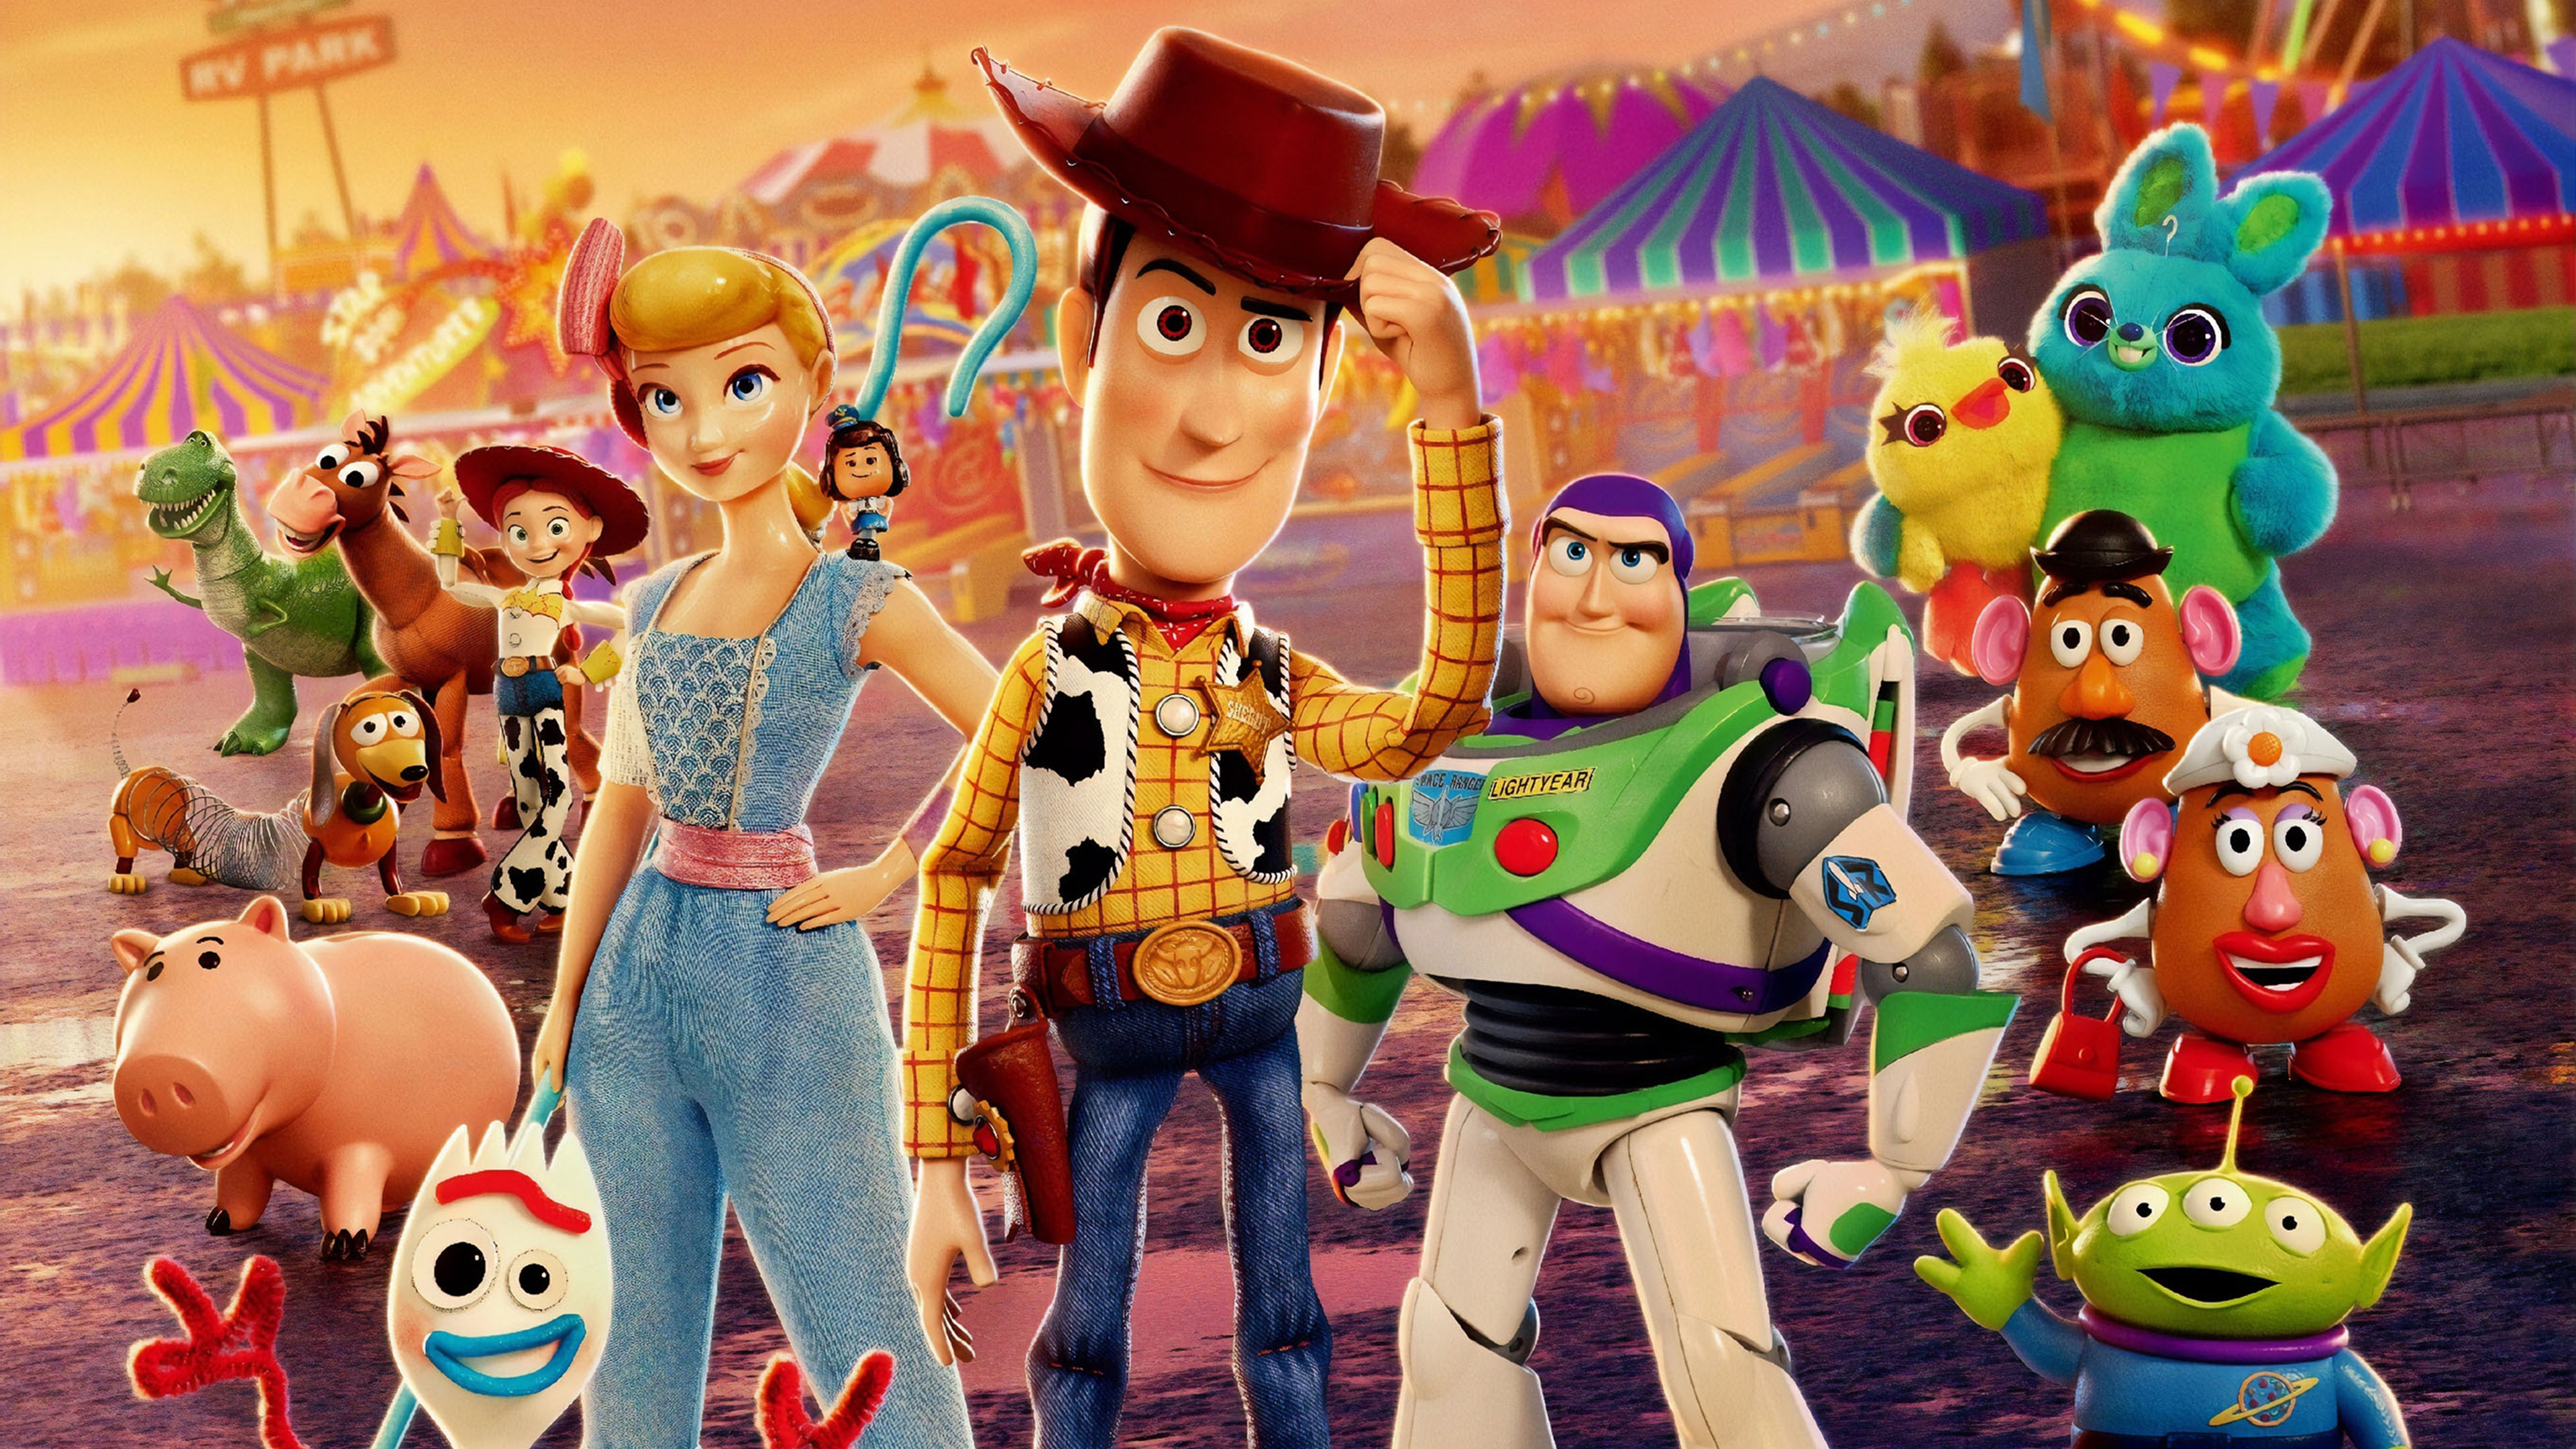 Detail Wallpaper Toy Story Hd Nomer 8